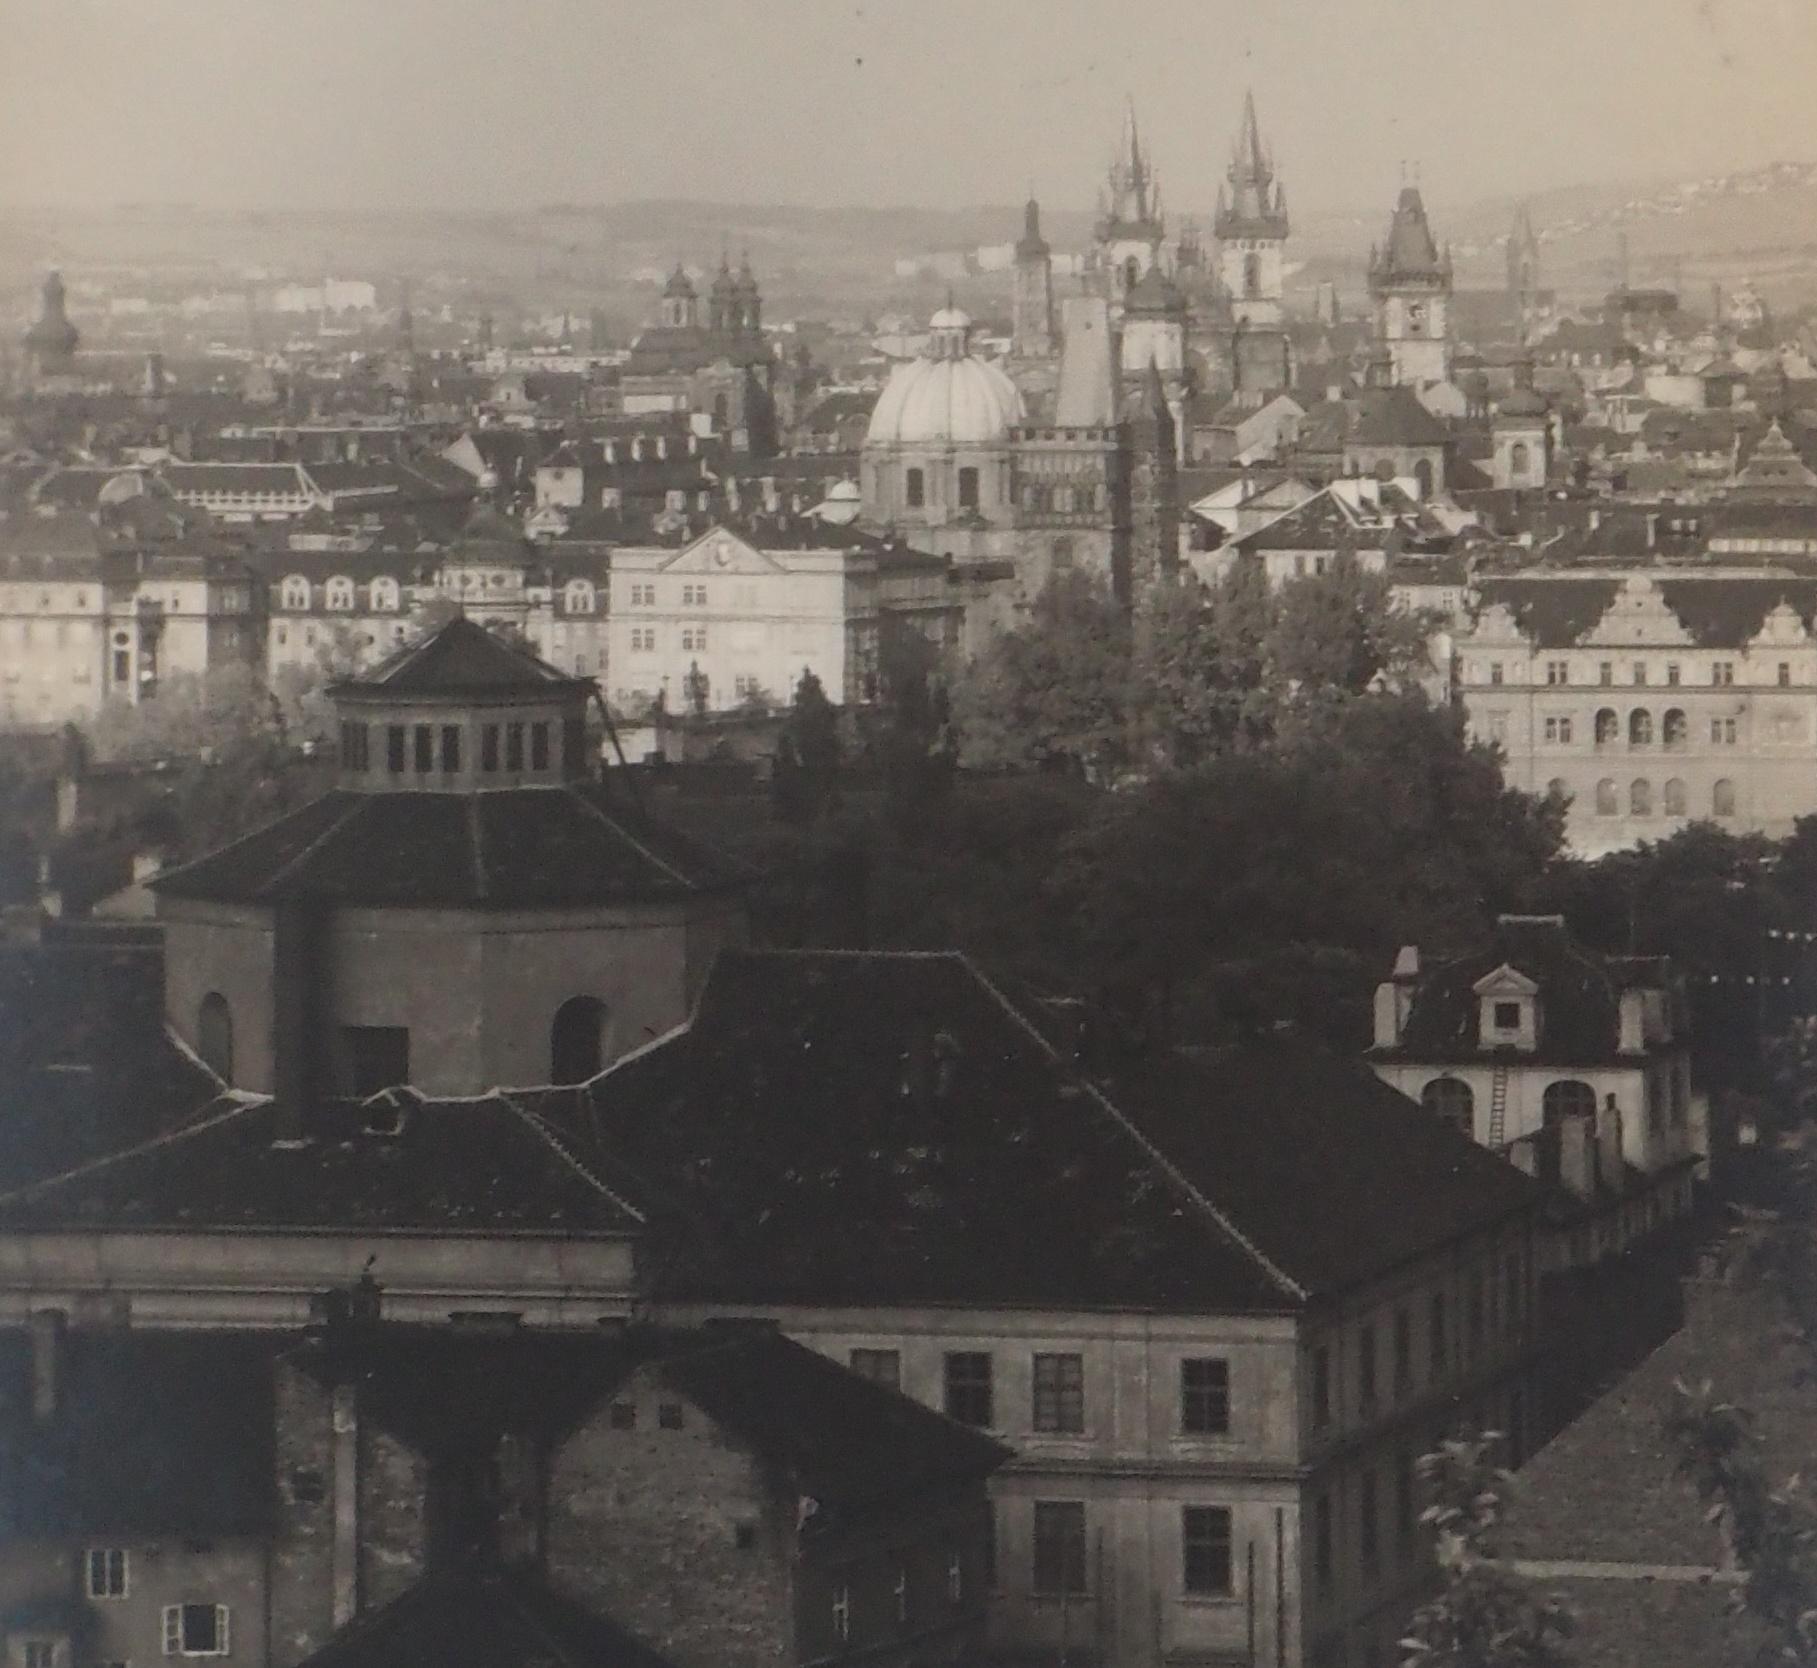 Josef Sudek
View of Prague

Original gelatin silver print
14 x 9 cm (c. 5.5 x 3.5 in)
Authenticated on the back by the workshop stamp (see picture)

Excellent condition